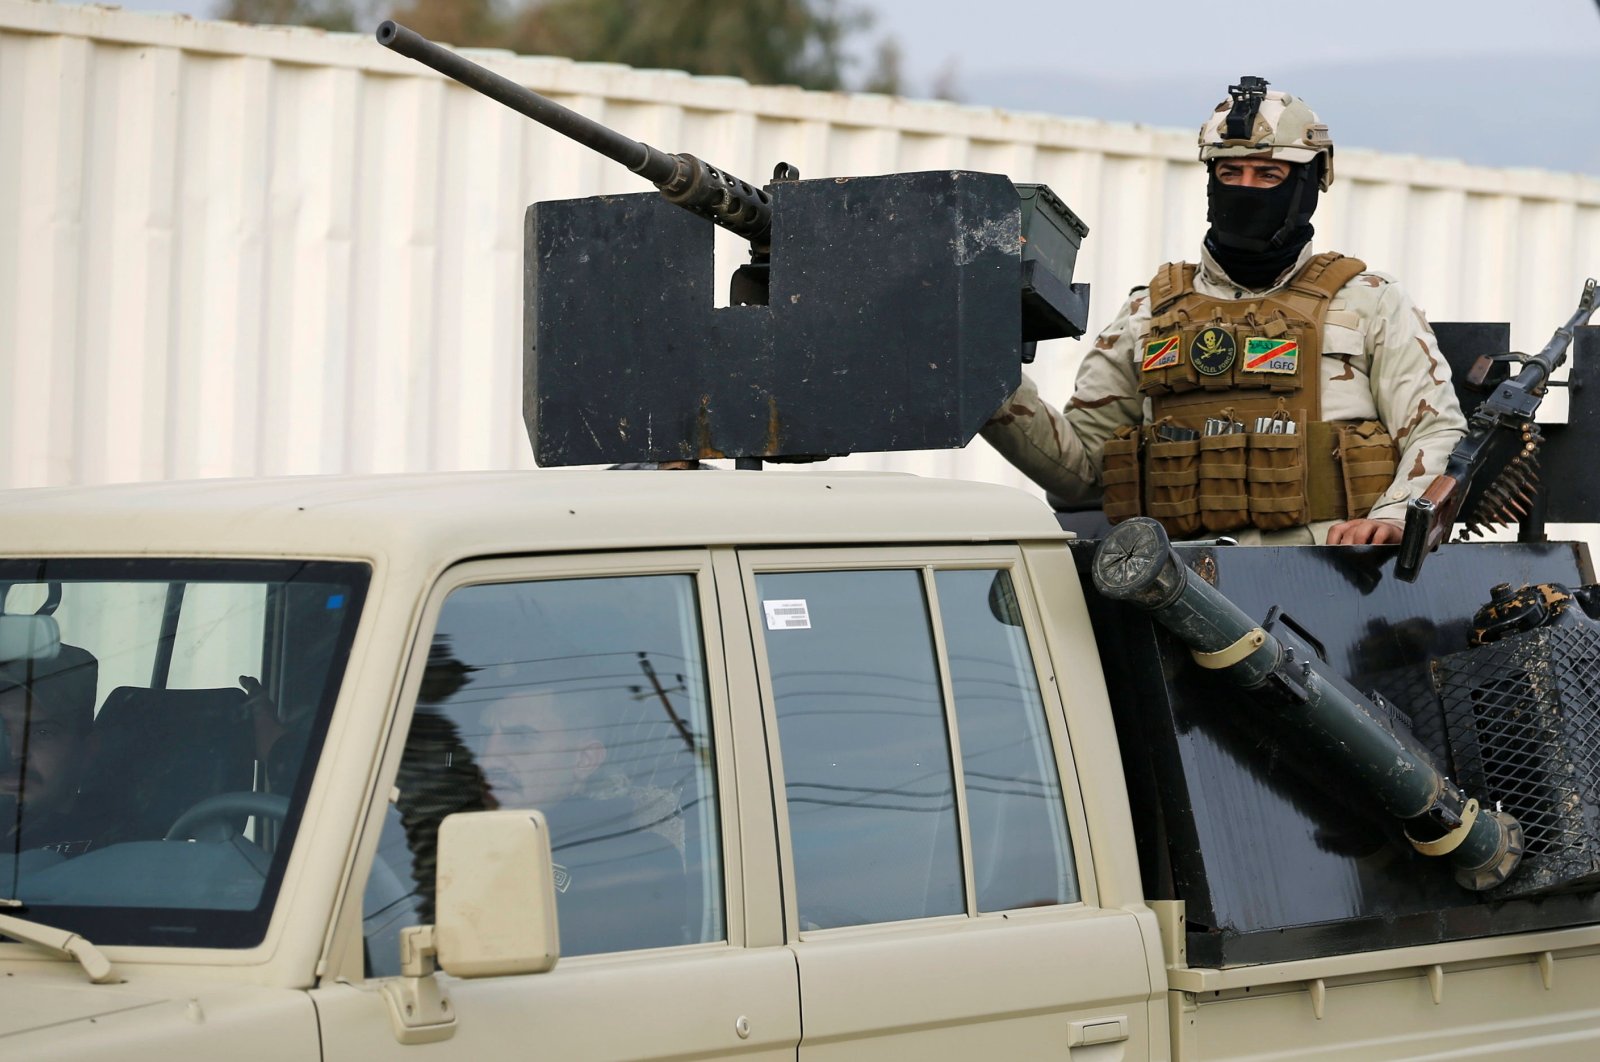 A member of Iraqi security forces rides a military vehicle during deployments in Sinjar, Iraq Dec. 1, 2020. REUTERS